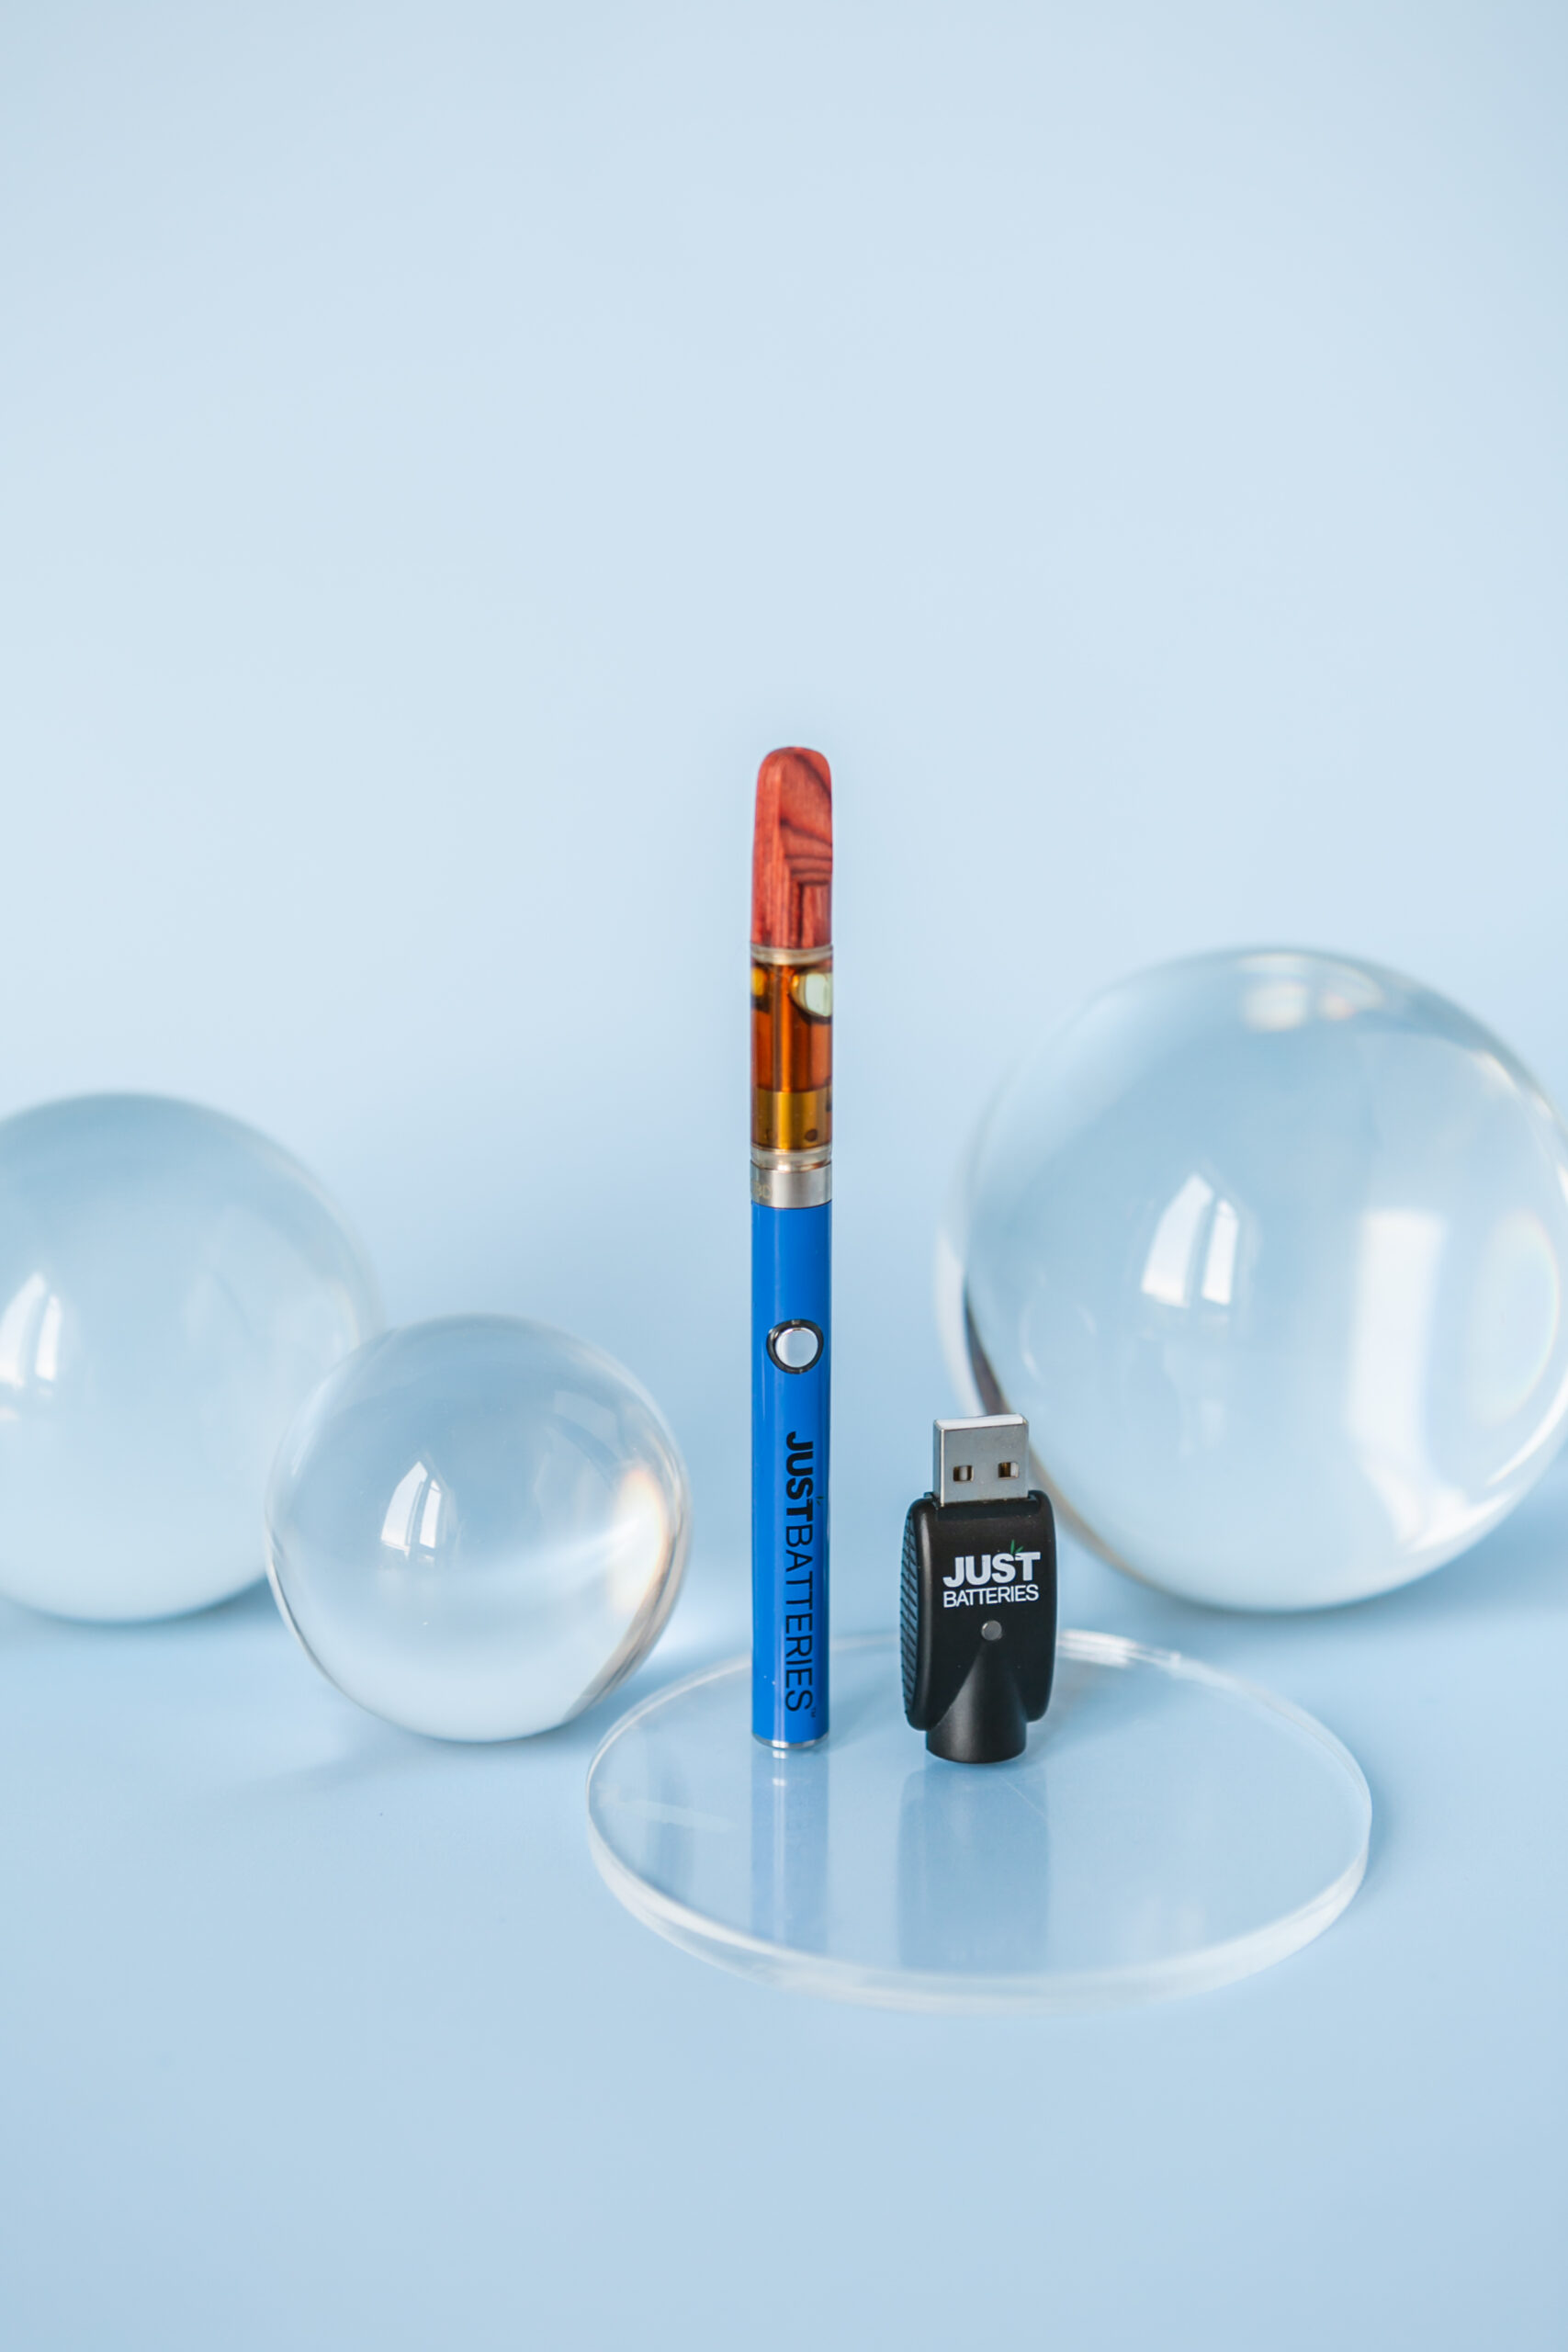 BUYING YOUR FIRST CBD VAPE PEN? LOOK FOR THESE THINGS